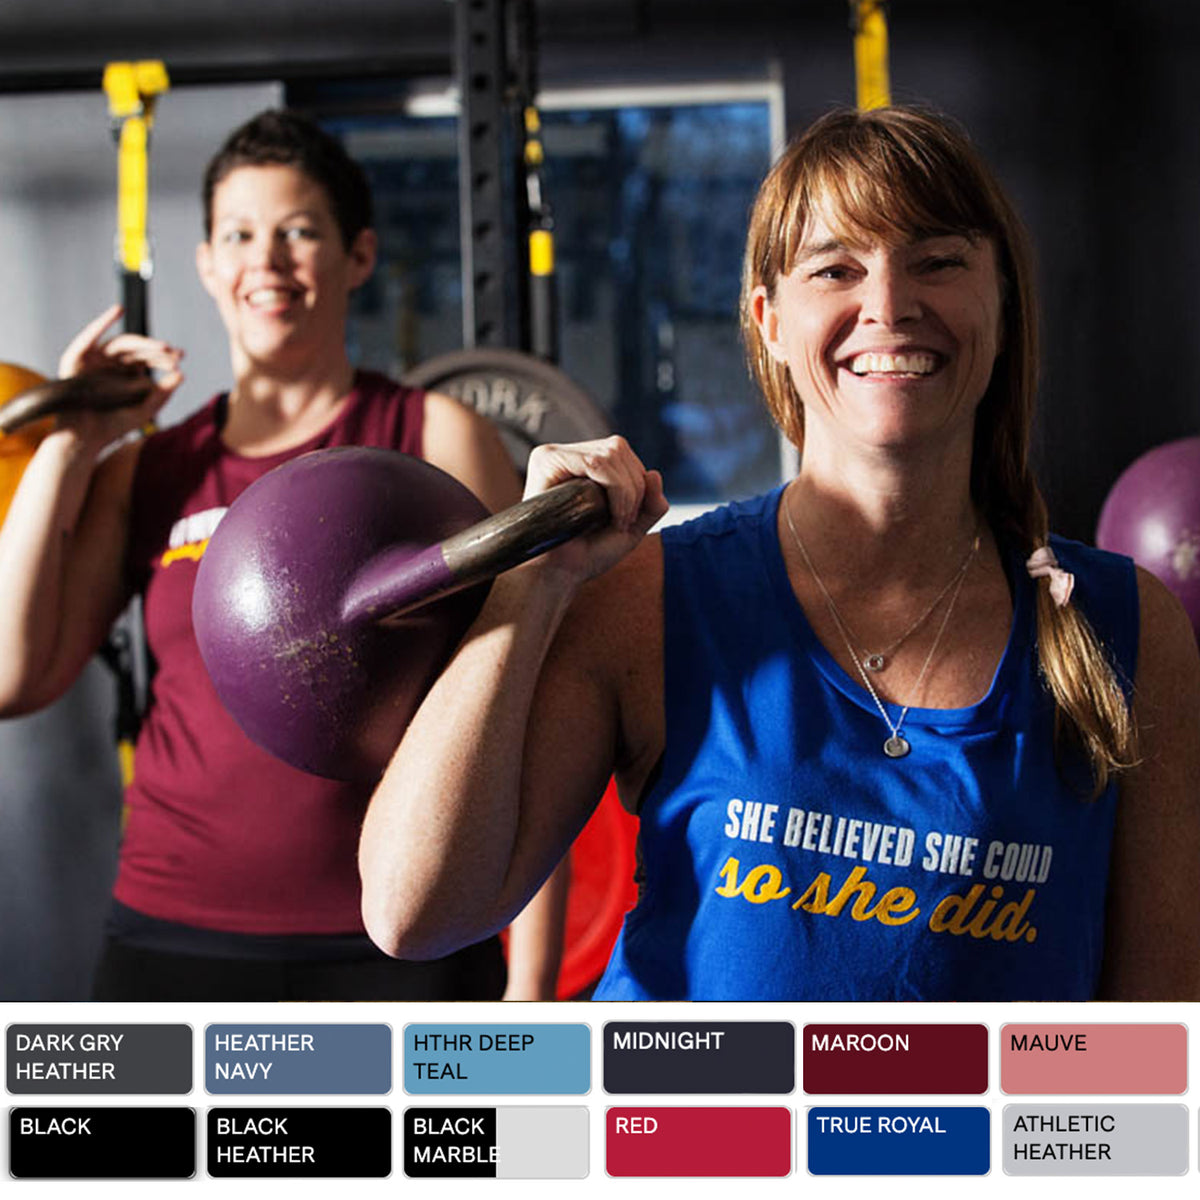 Women's Gym Tanks with Empowering Sayings